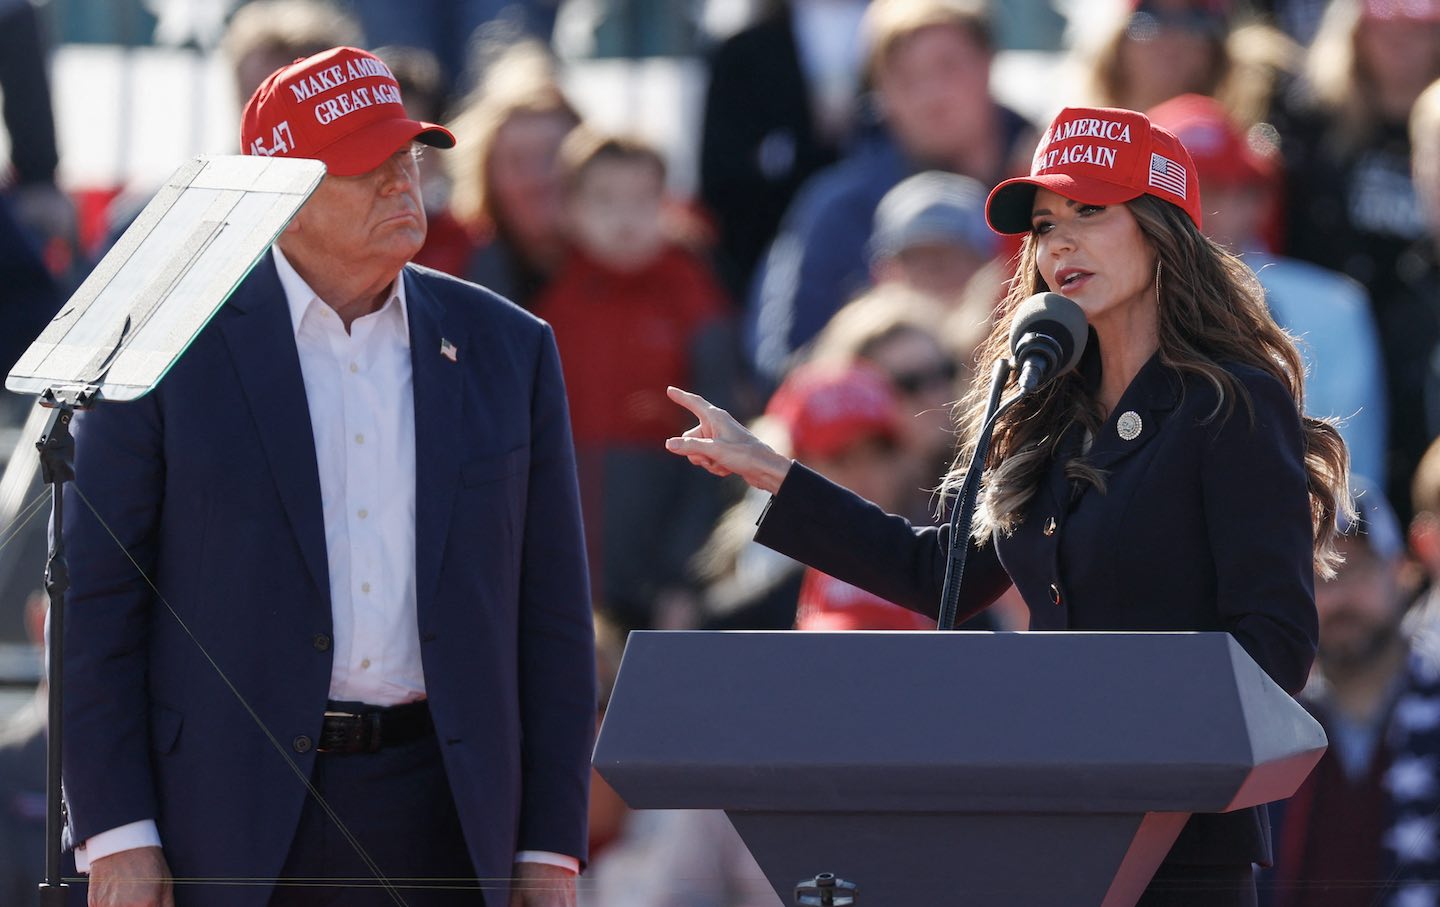 Kristi Noem Is the Latest Republican to Learn You Can't Out-Trump Donald Trump